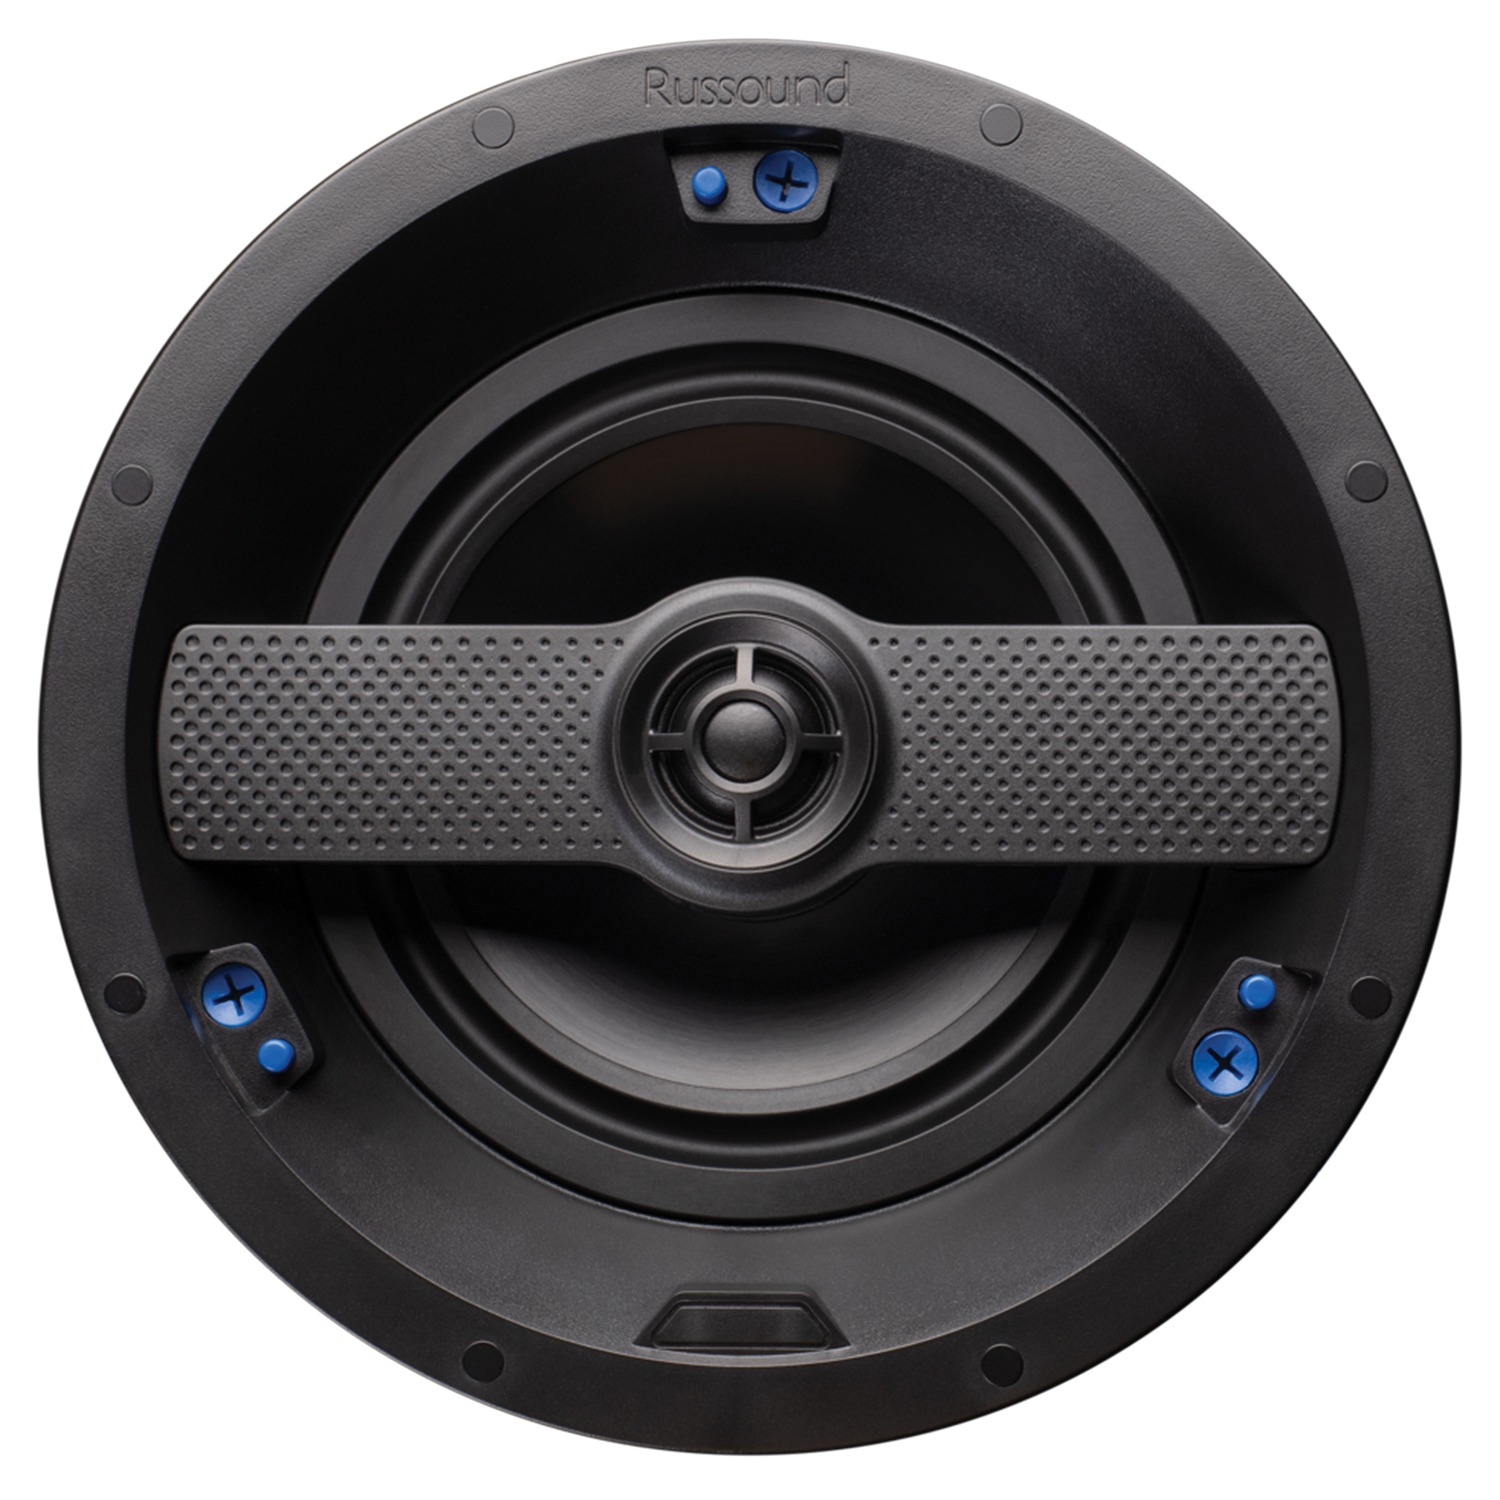 Russound IC-820 Architectural Series 8-Inch In-Ceiling Enhanced Performance 2-Way Loudspeakers - image 1 of 3